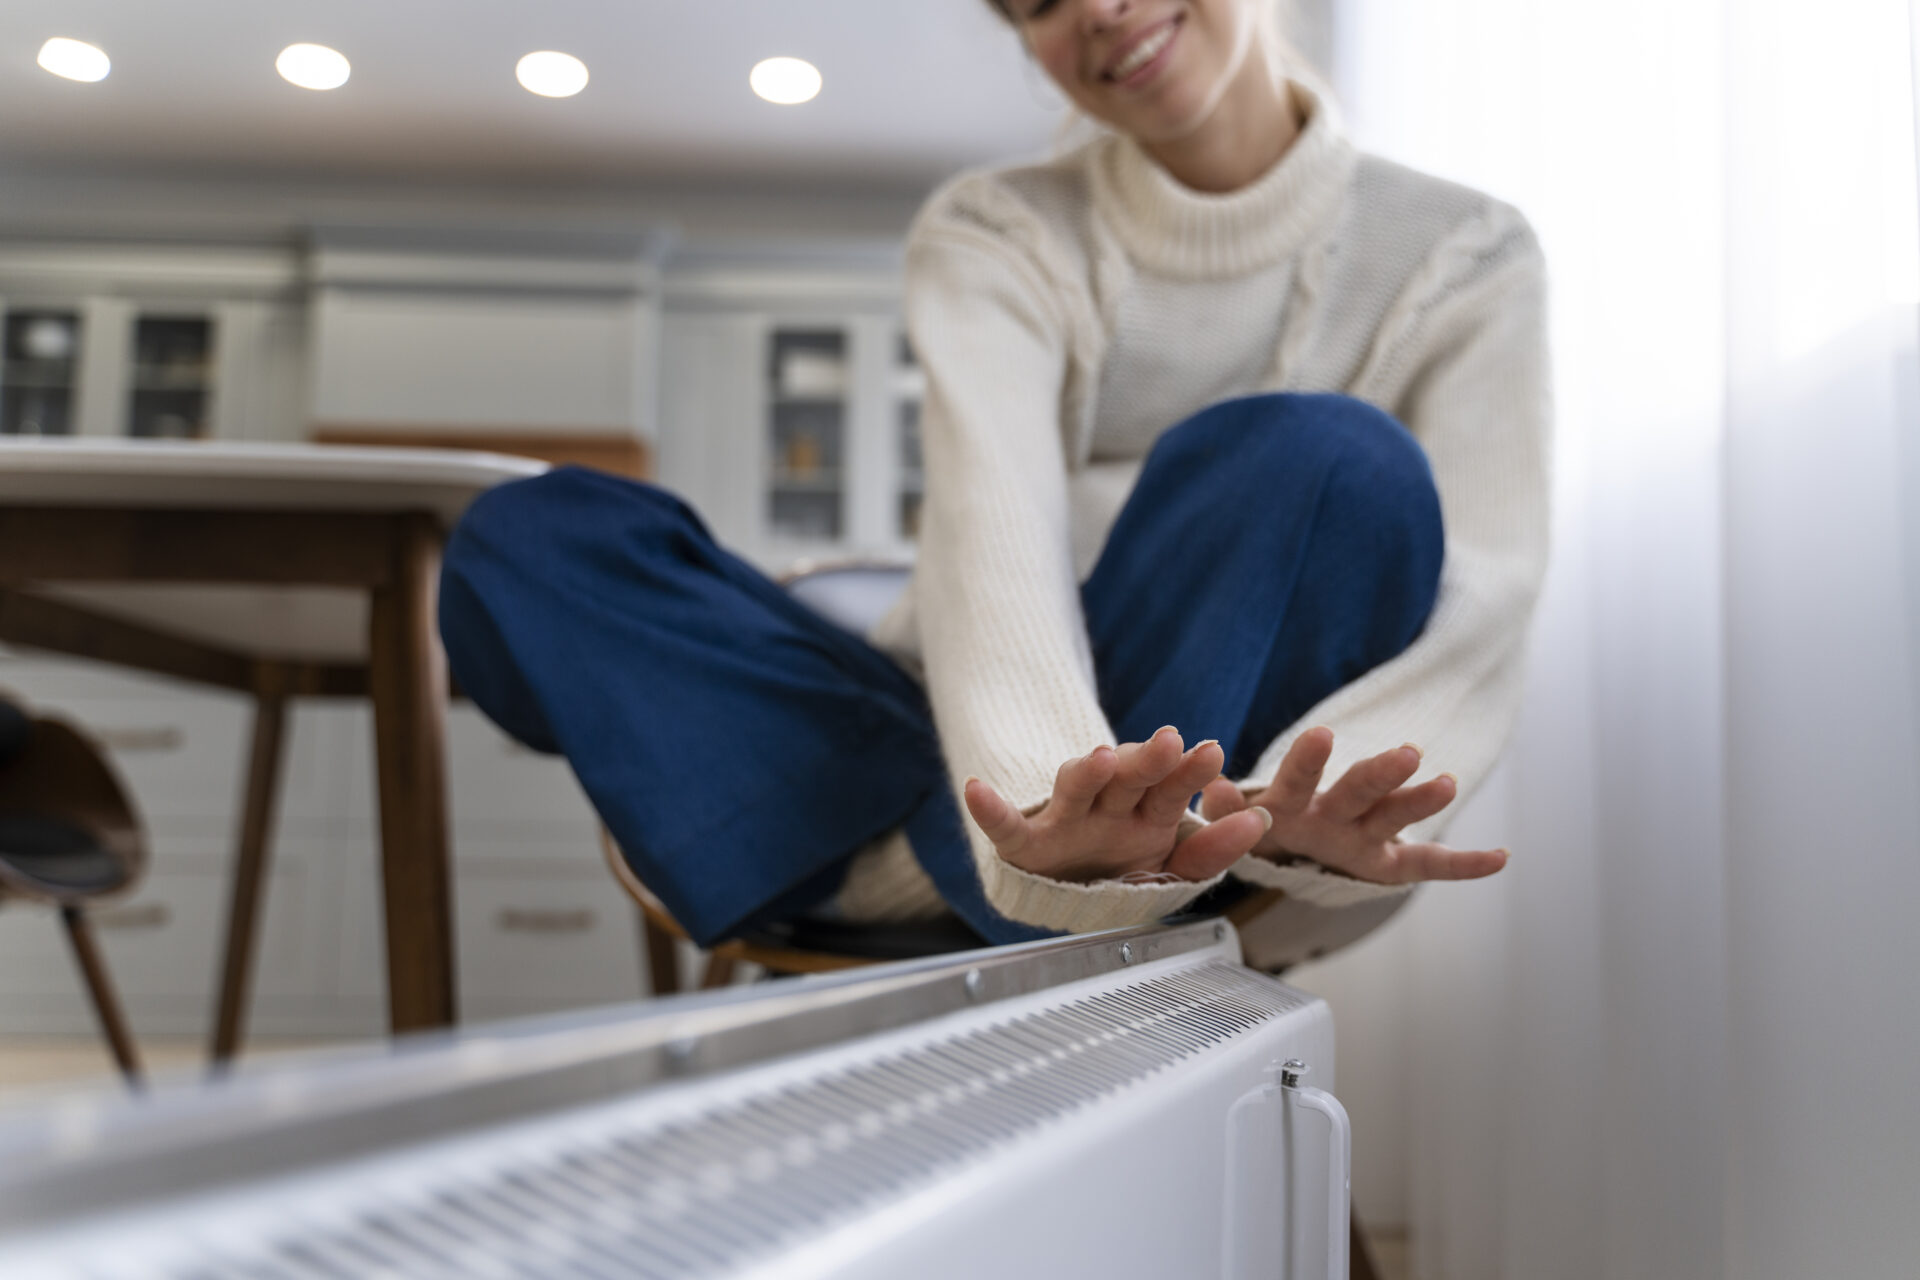 How to lower your home boiler heating cost this winter – Advice for your next customer